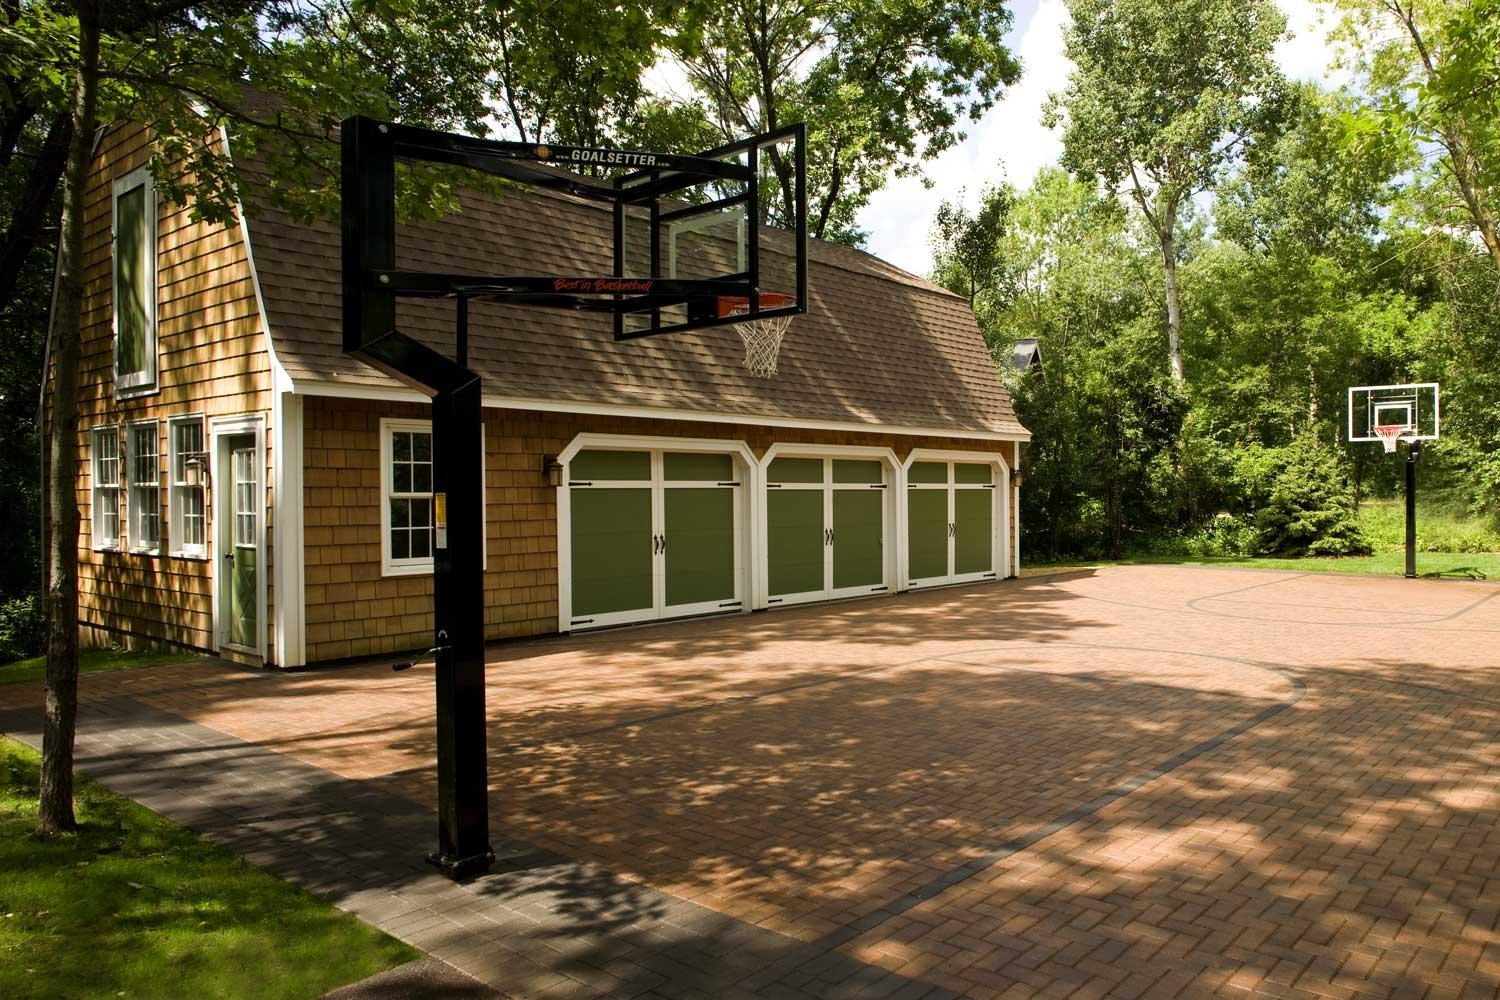 Finished product a one-of-a-kind paver basketball court and driveway